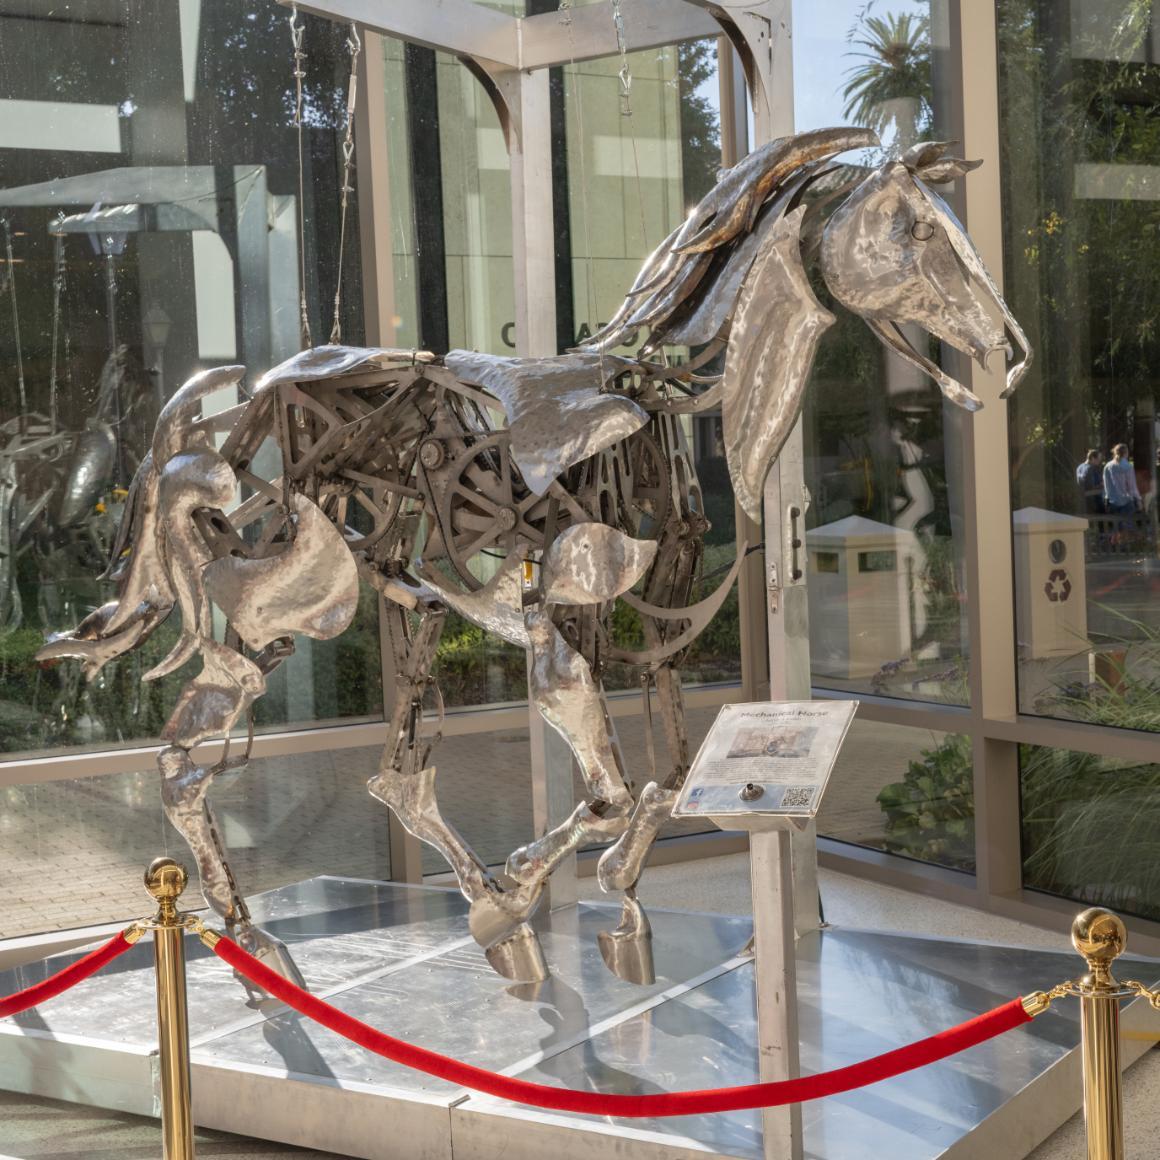 A photo of the Mechanical Horse Displayed in the SCU STEM building image link to story